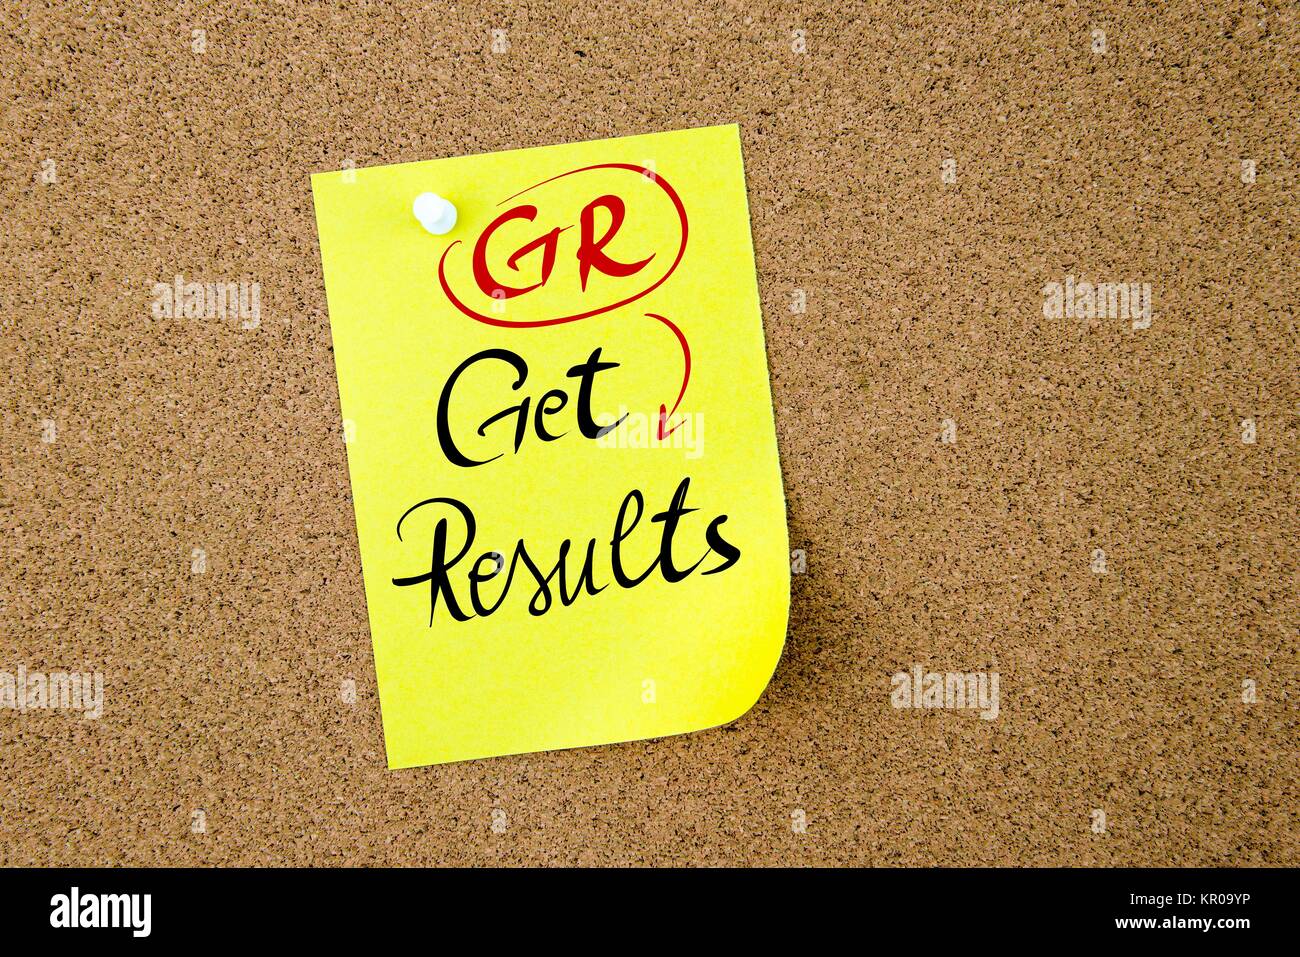 Business Acronym GR Get Results Stock Photo